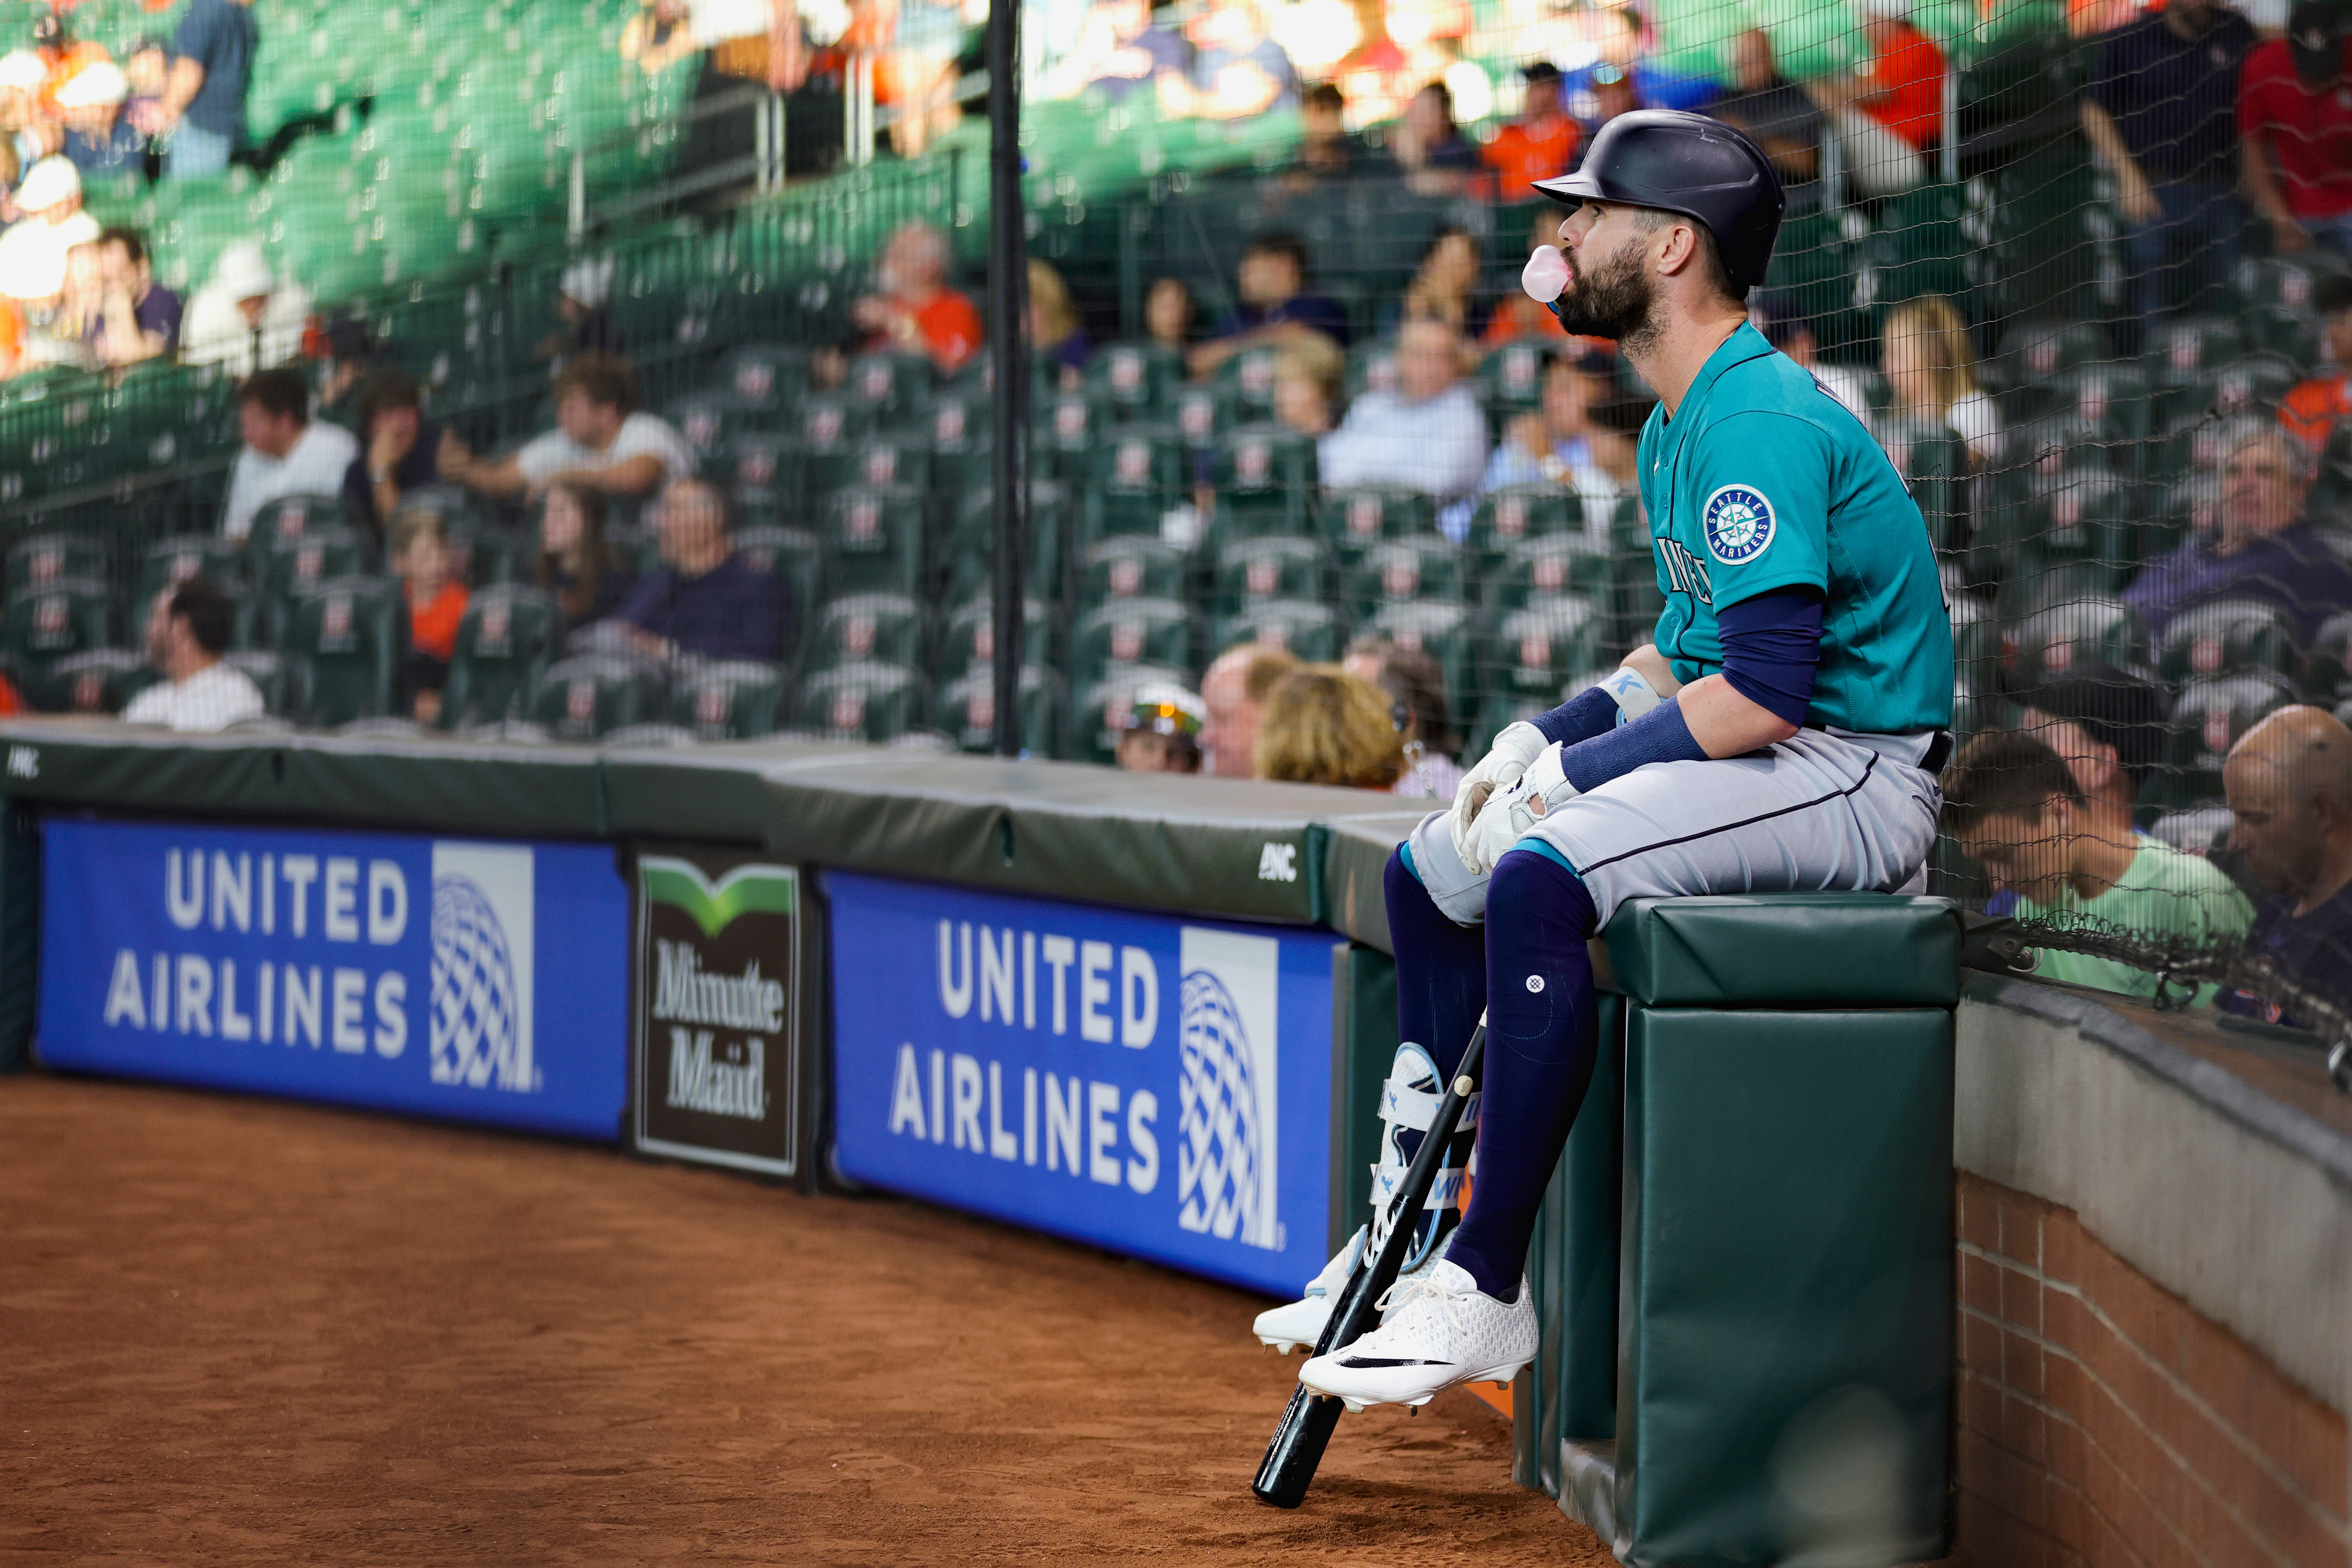 Can Jesse Winker Bounce Back to His 2021 Form?